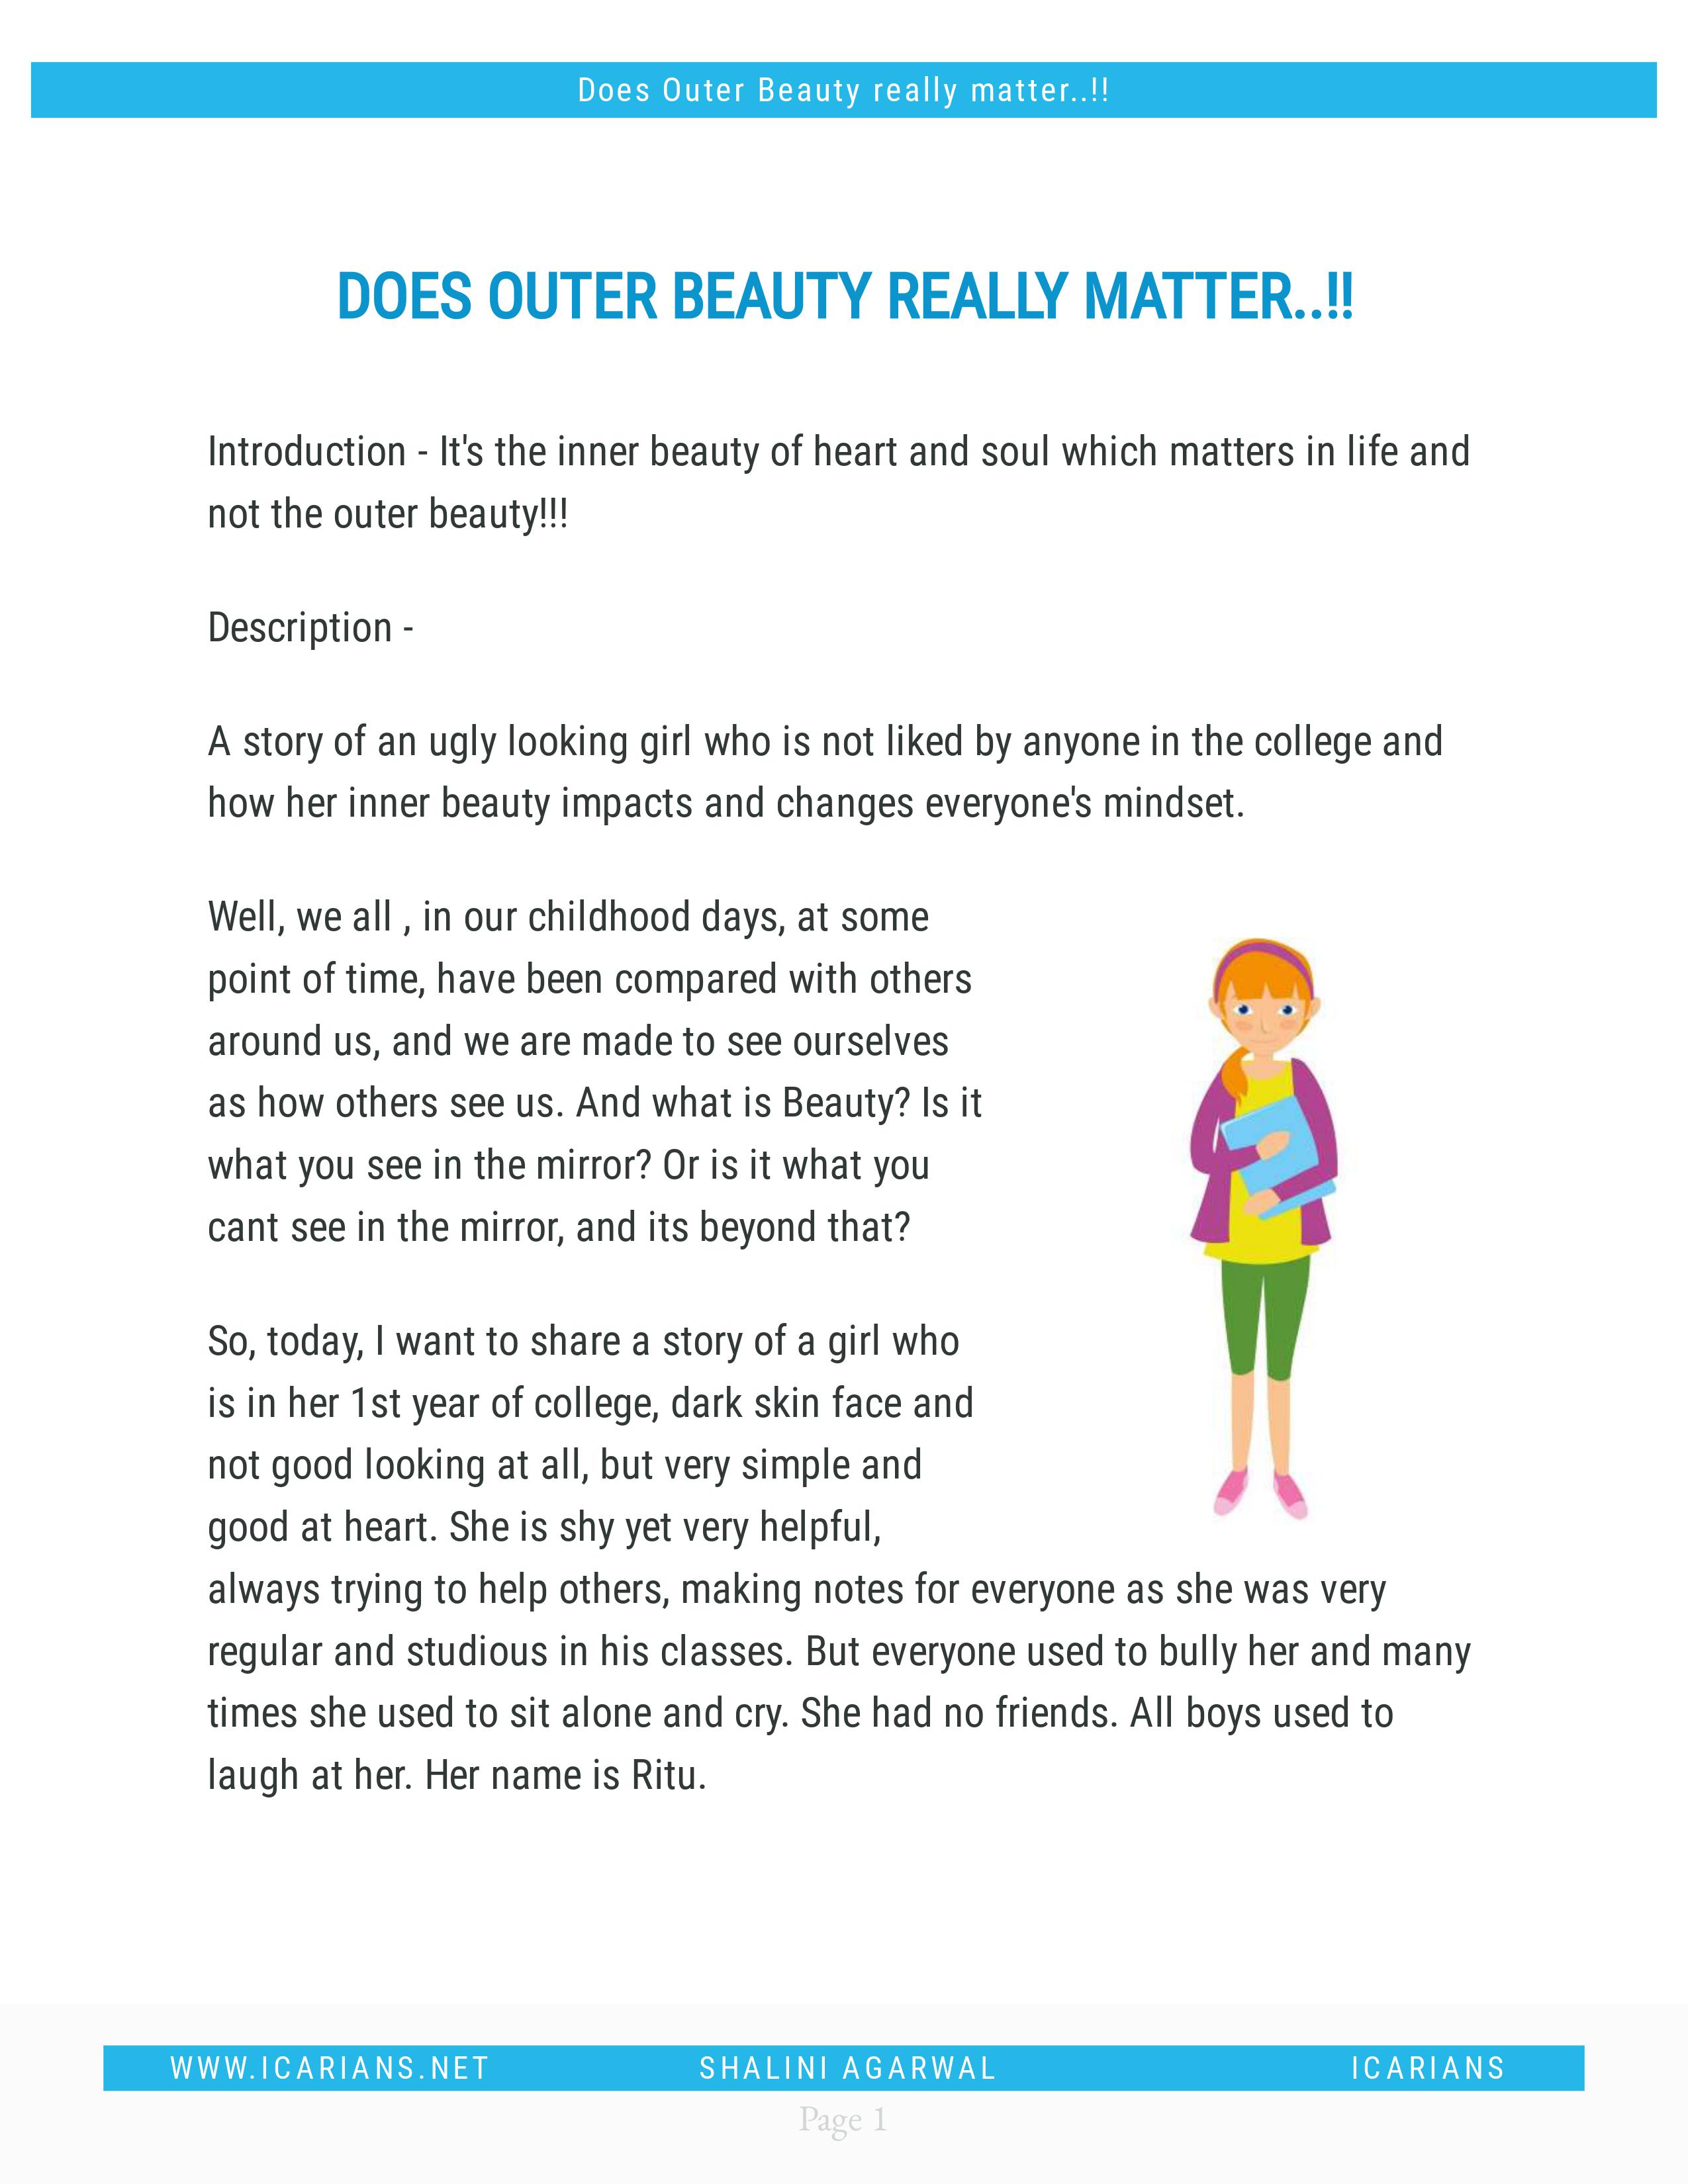 DOES OUTER BEAUTY REALLY MATTER